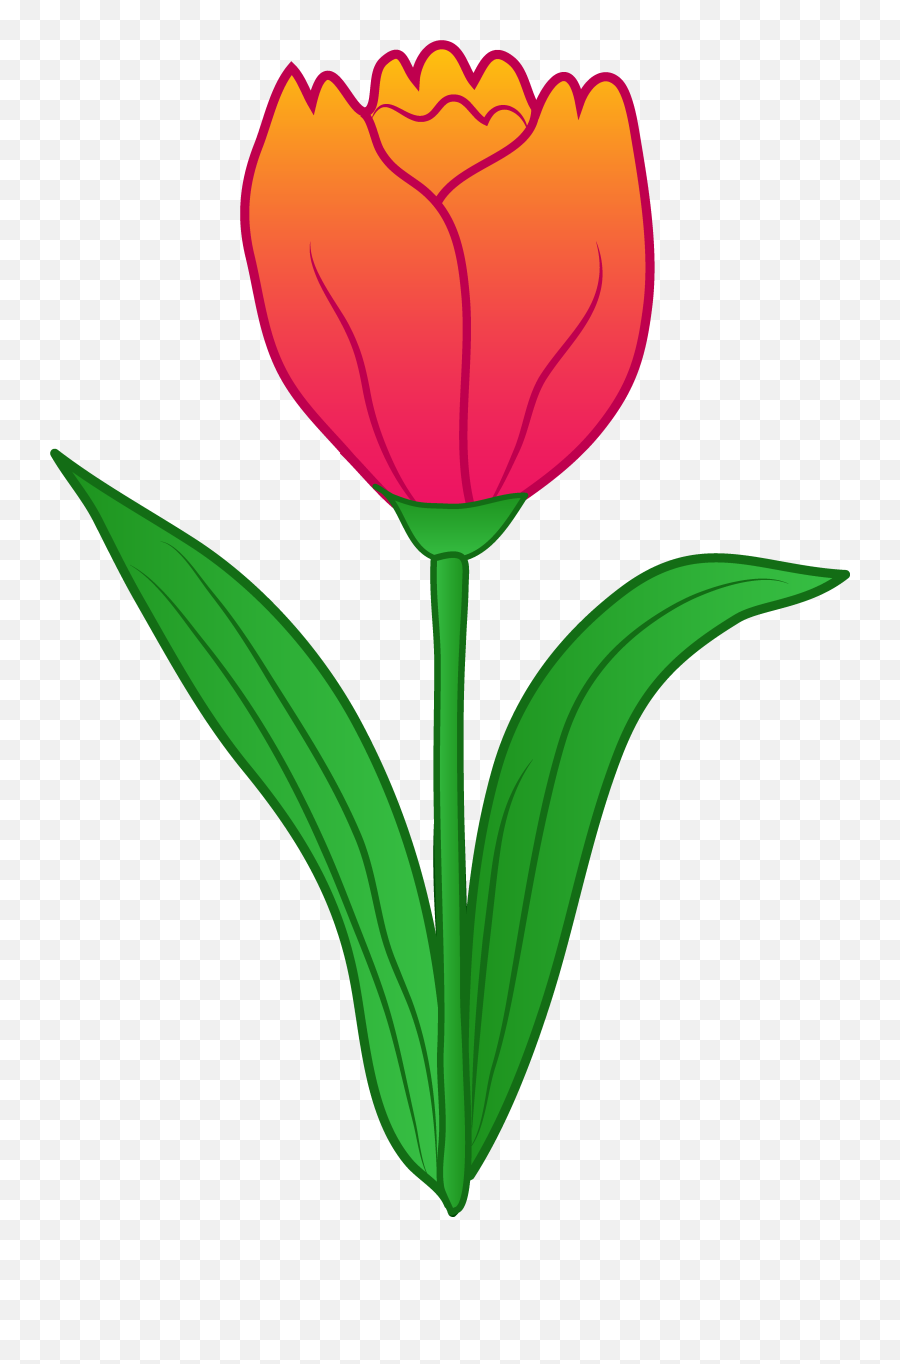 Library Of Flower Image Free Tulip Png Files Clipart - Clip Art Of Tulip Flower,Tulip Png